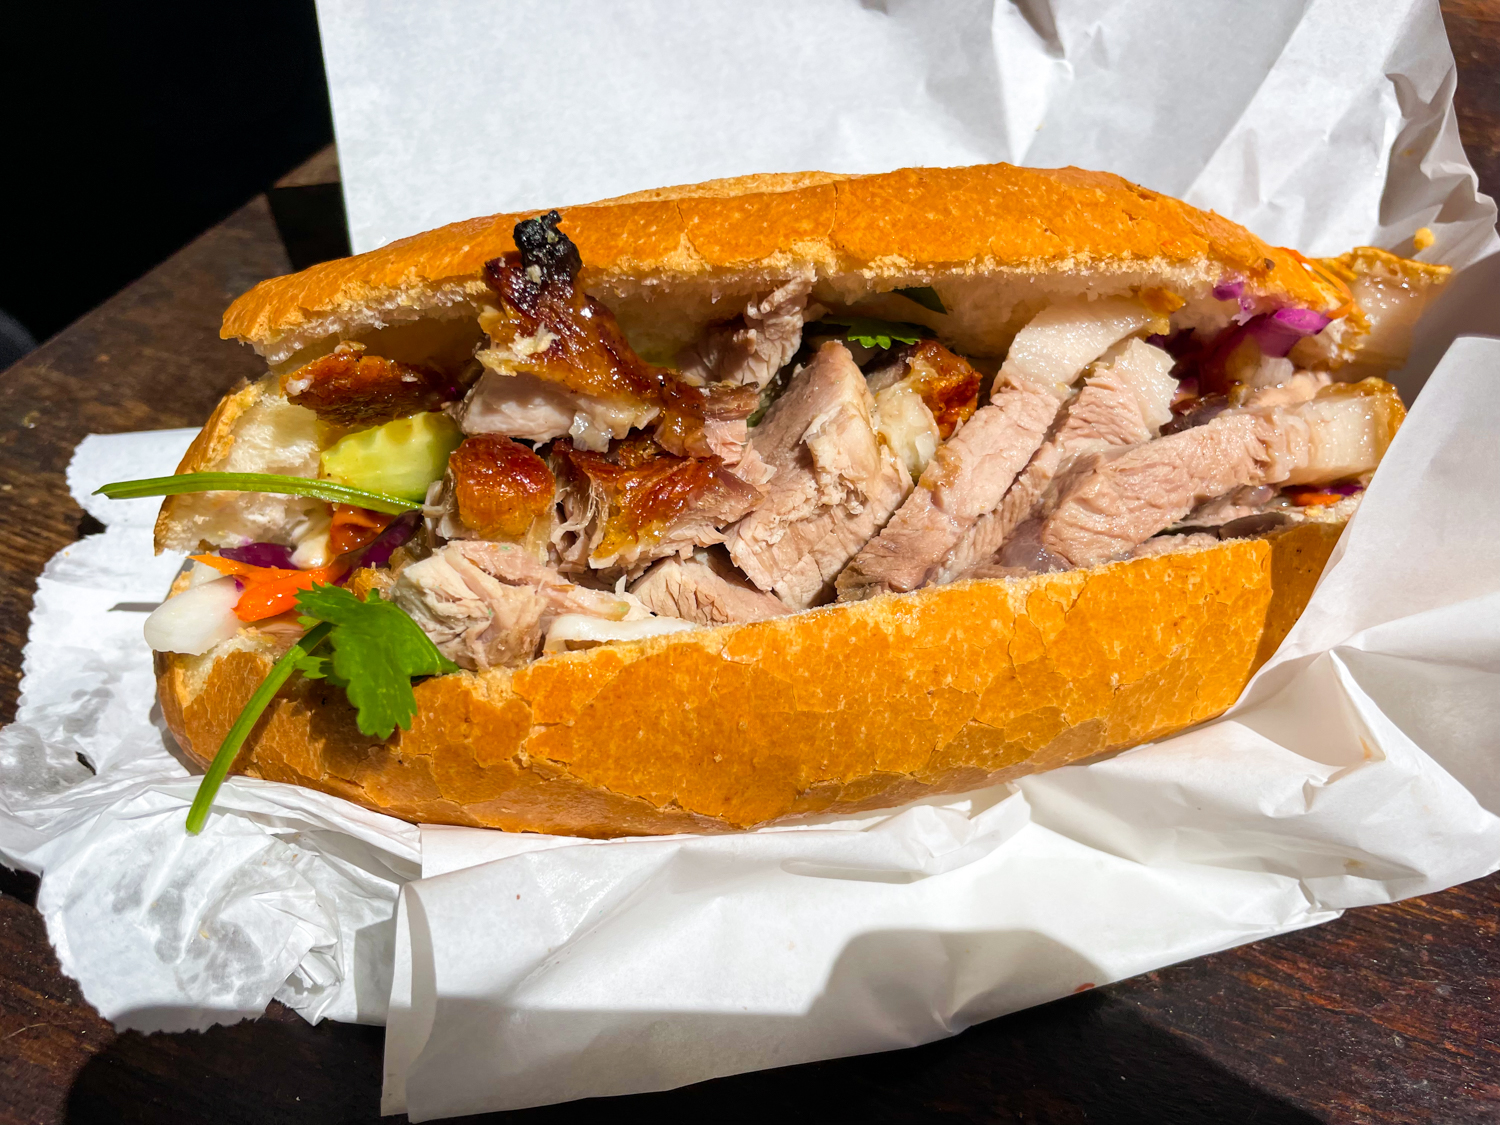 A crispy pork banh mi from T&L Bakery in Cremorne. The paper wrapper is splayed out across a wooden table with the crunchy sandwich placed in the center. Crispy, fatty pork chunks are seen spilling out of the banh mi, with hints of coriander, carrot, and cucumber poking out of the sides.